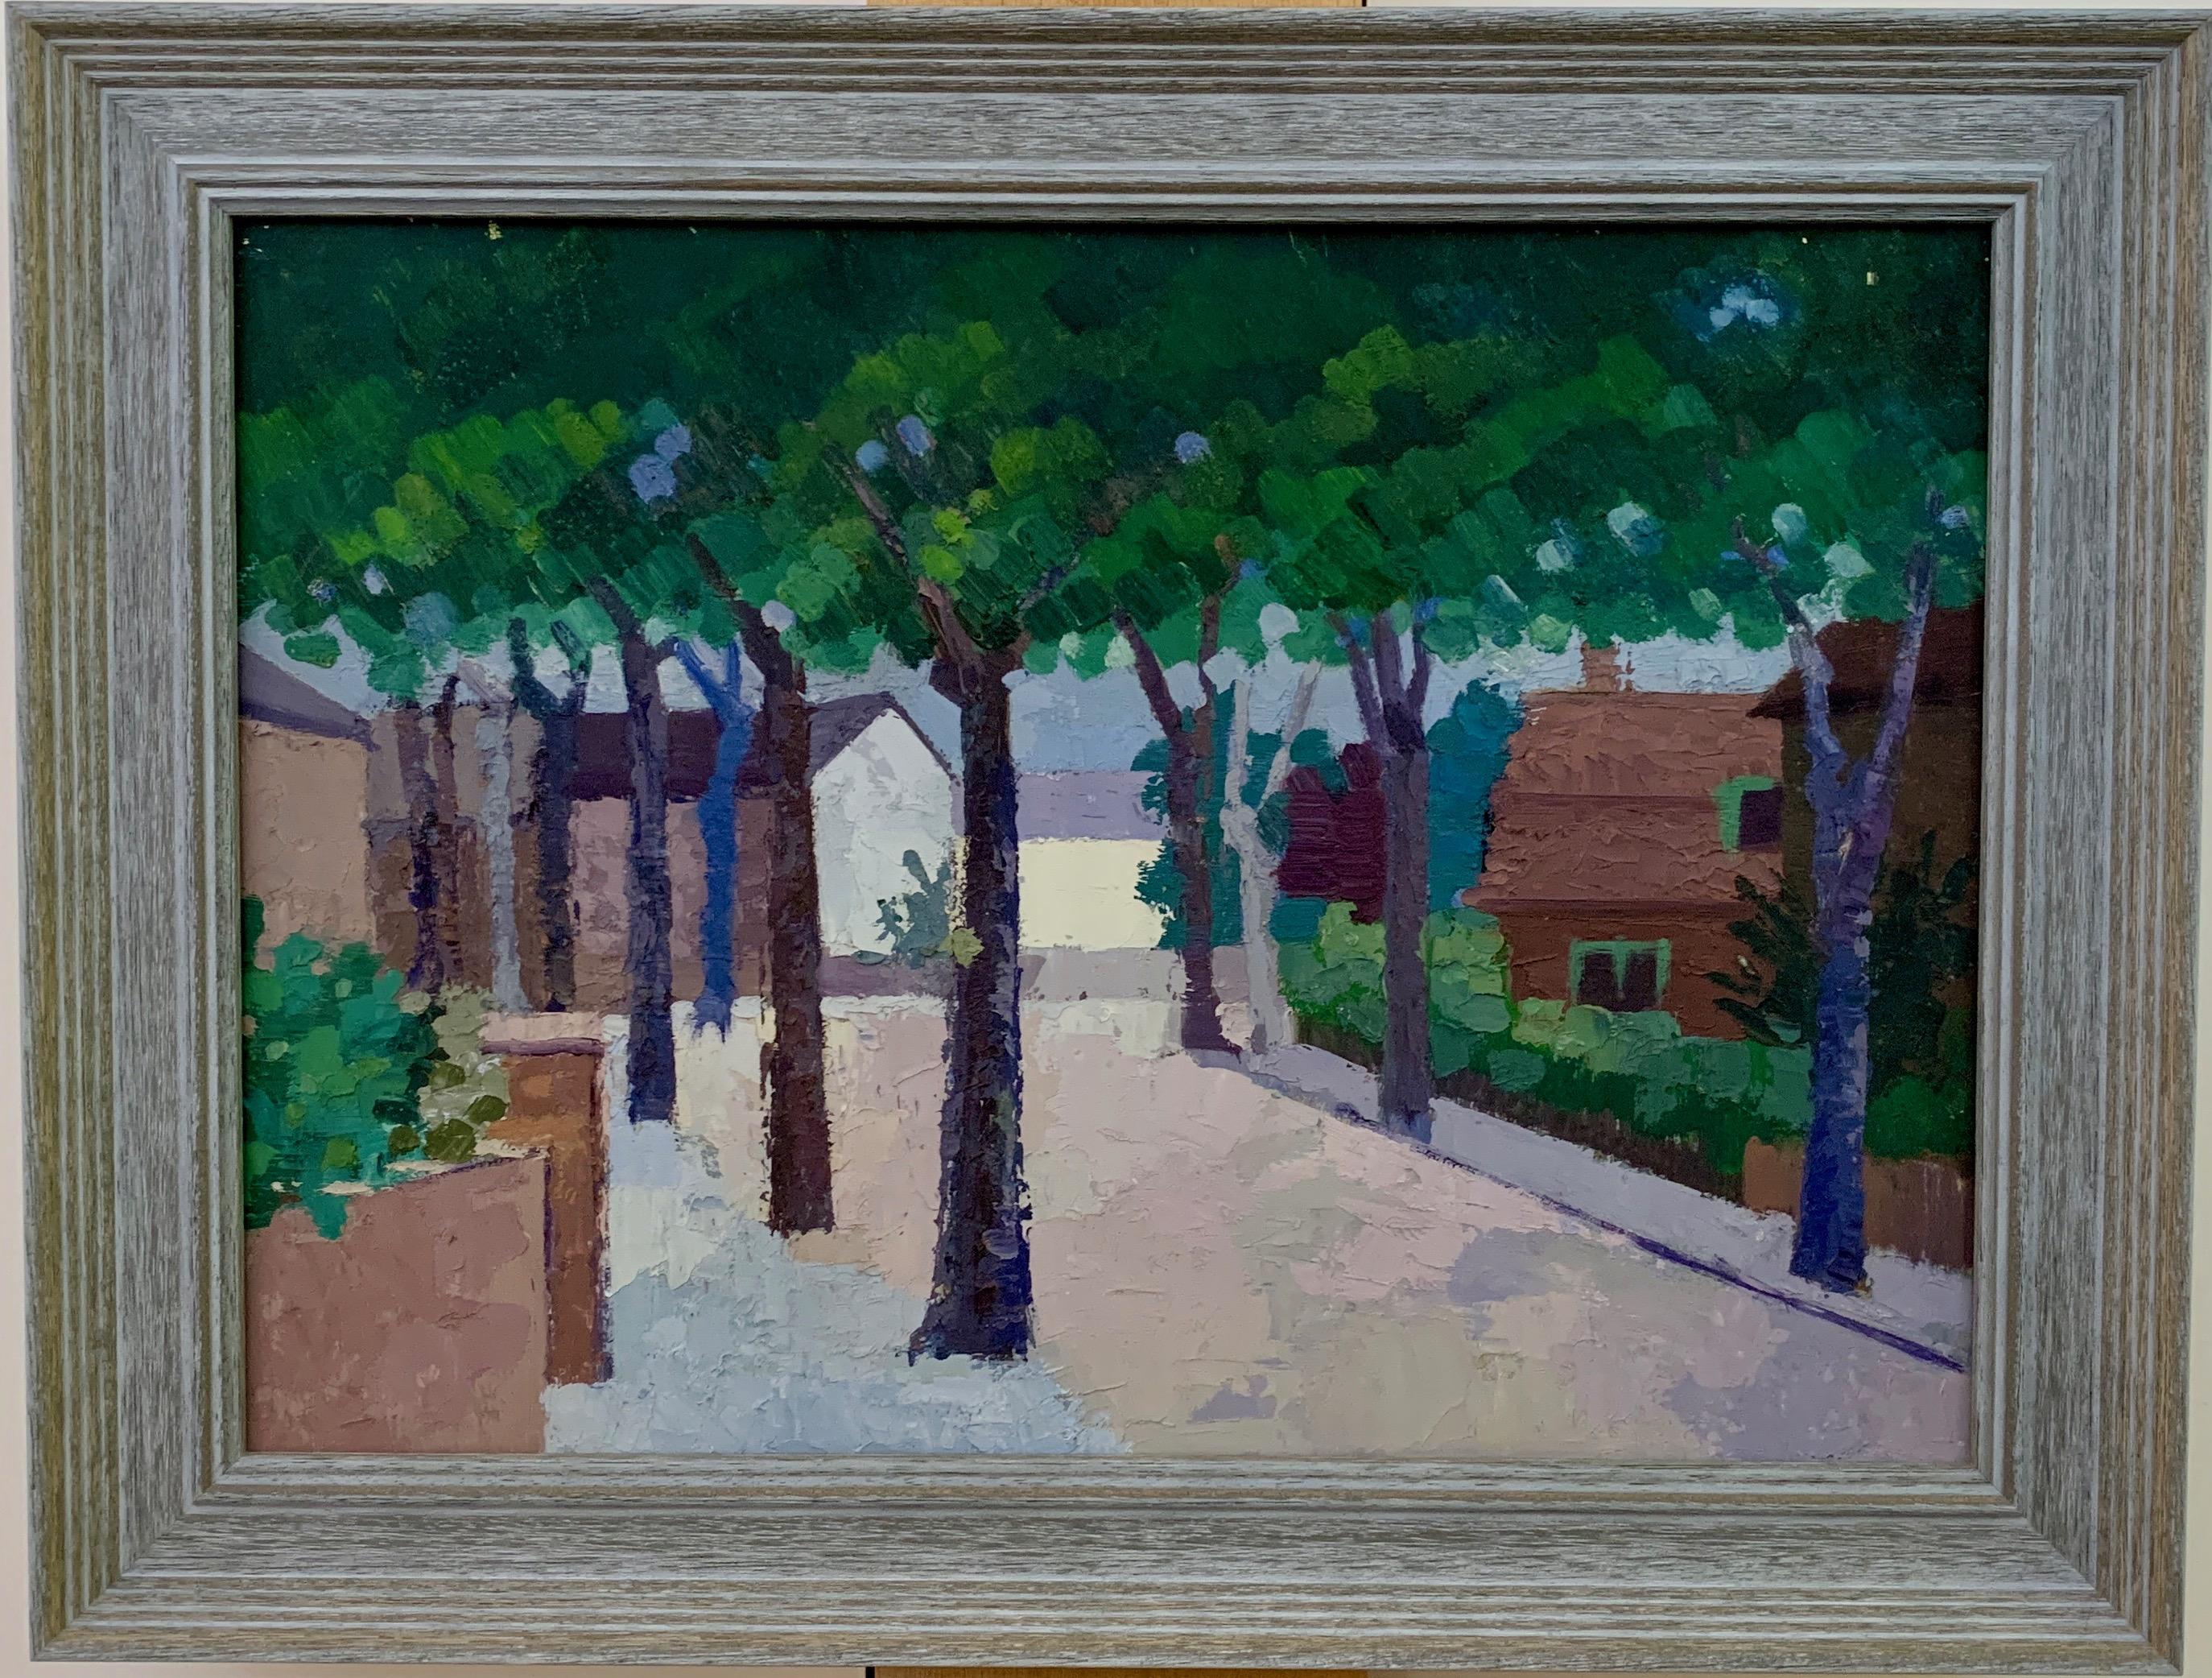 20th century English Impressionist town scene, possibly France